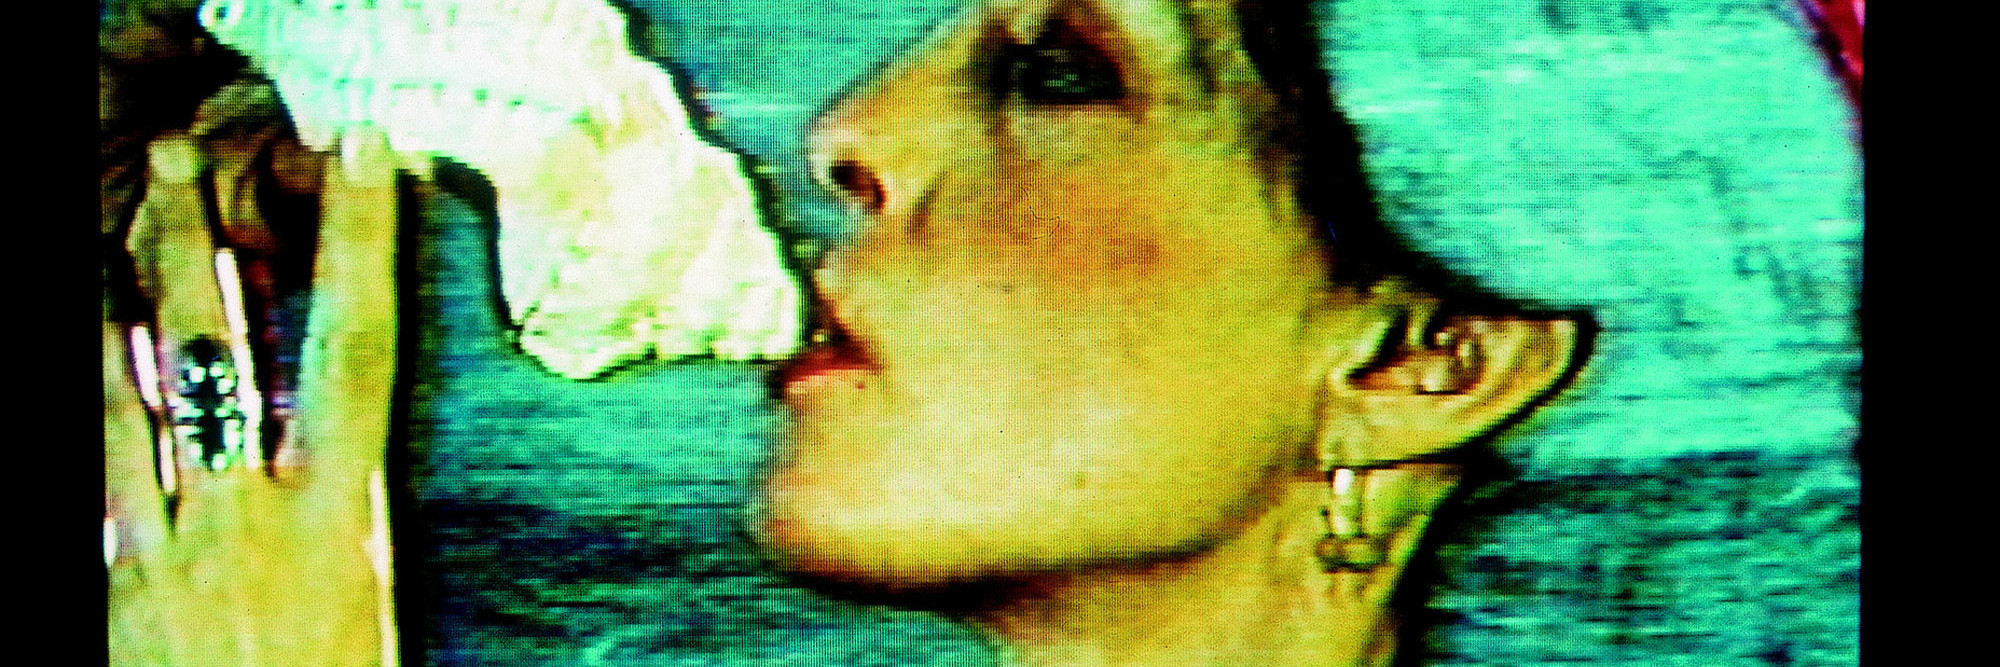 Joan Jonas. Still from Double Lunar Dogs. 1984. Video (color, sound), 24 min. The Museum of Modern Art, New York. Purchase. © 2021 Joan Jonas. Image courtesy Electronic Arts Intermix (EAI), New York